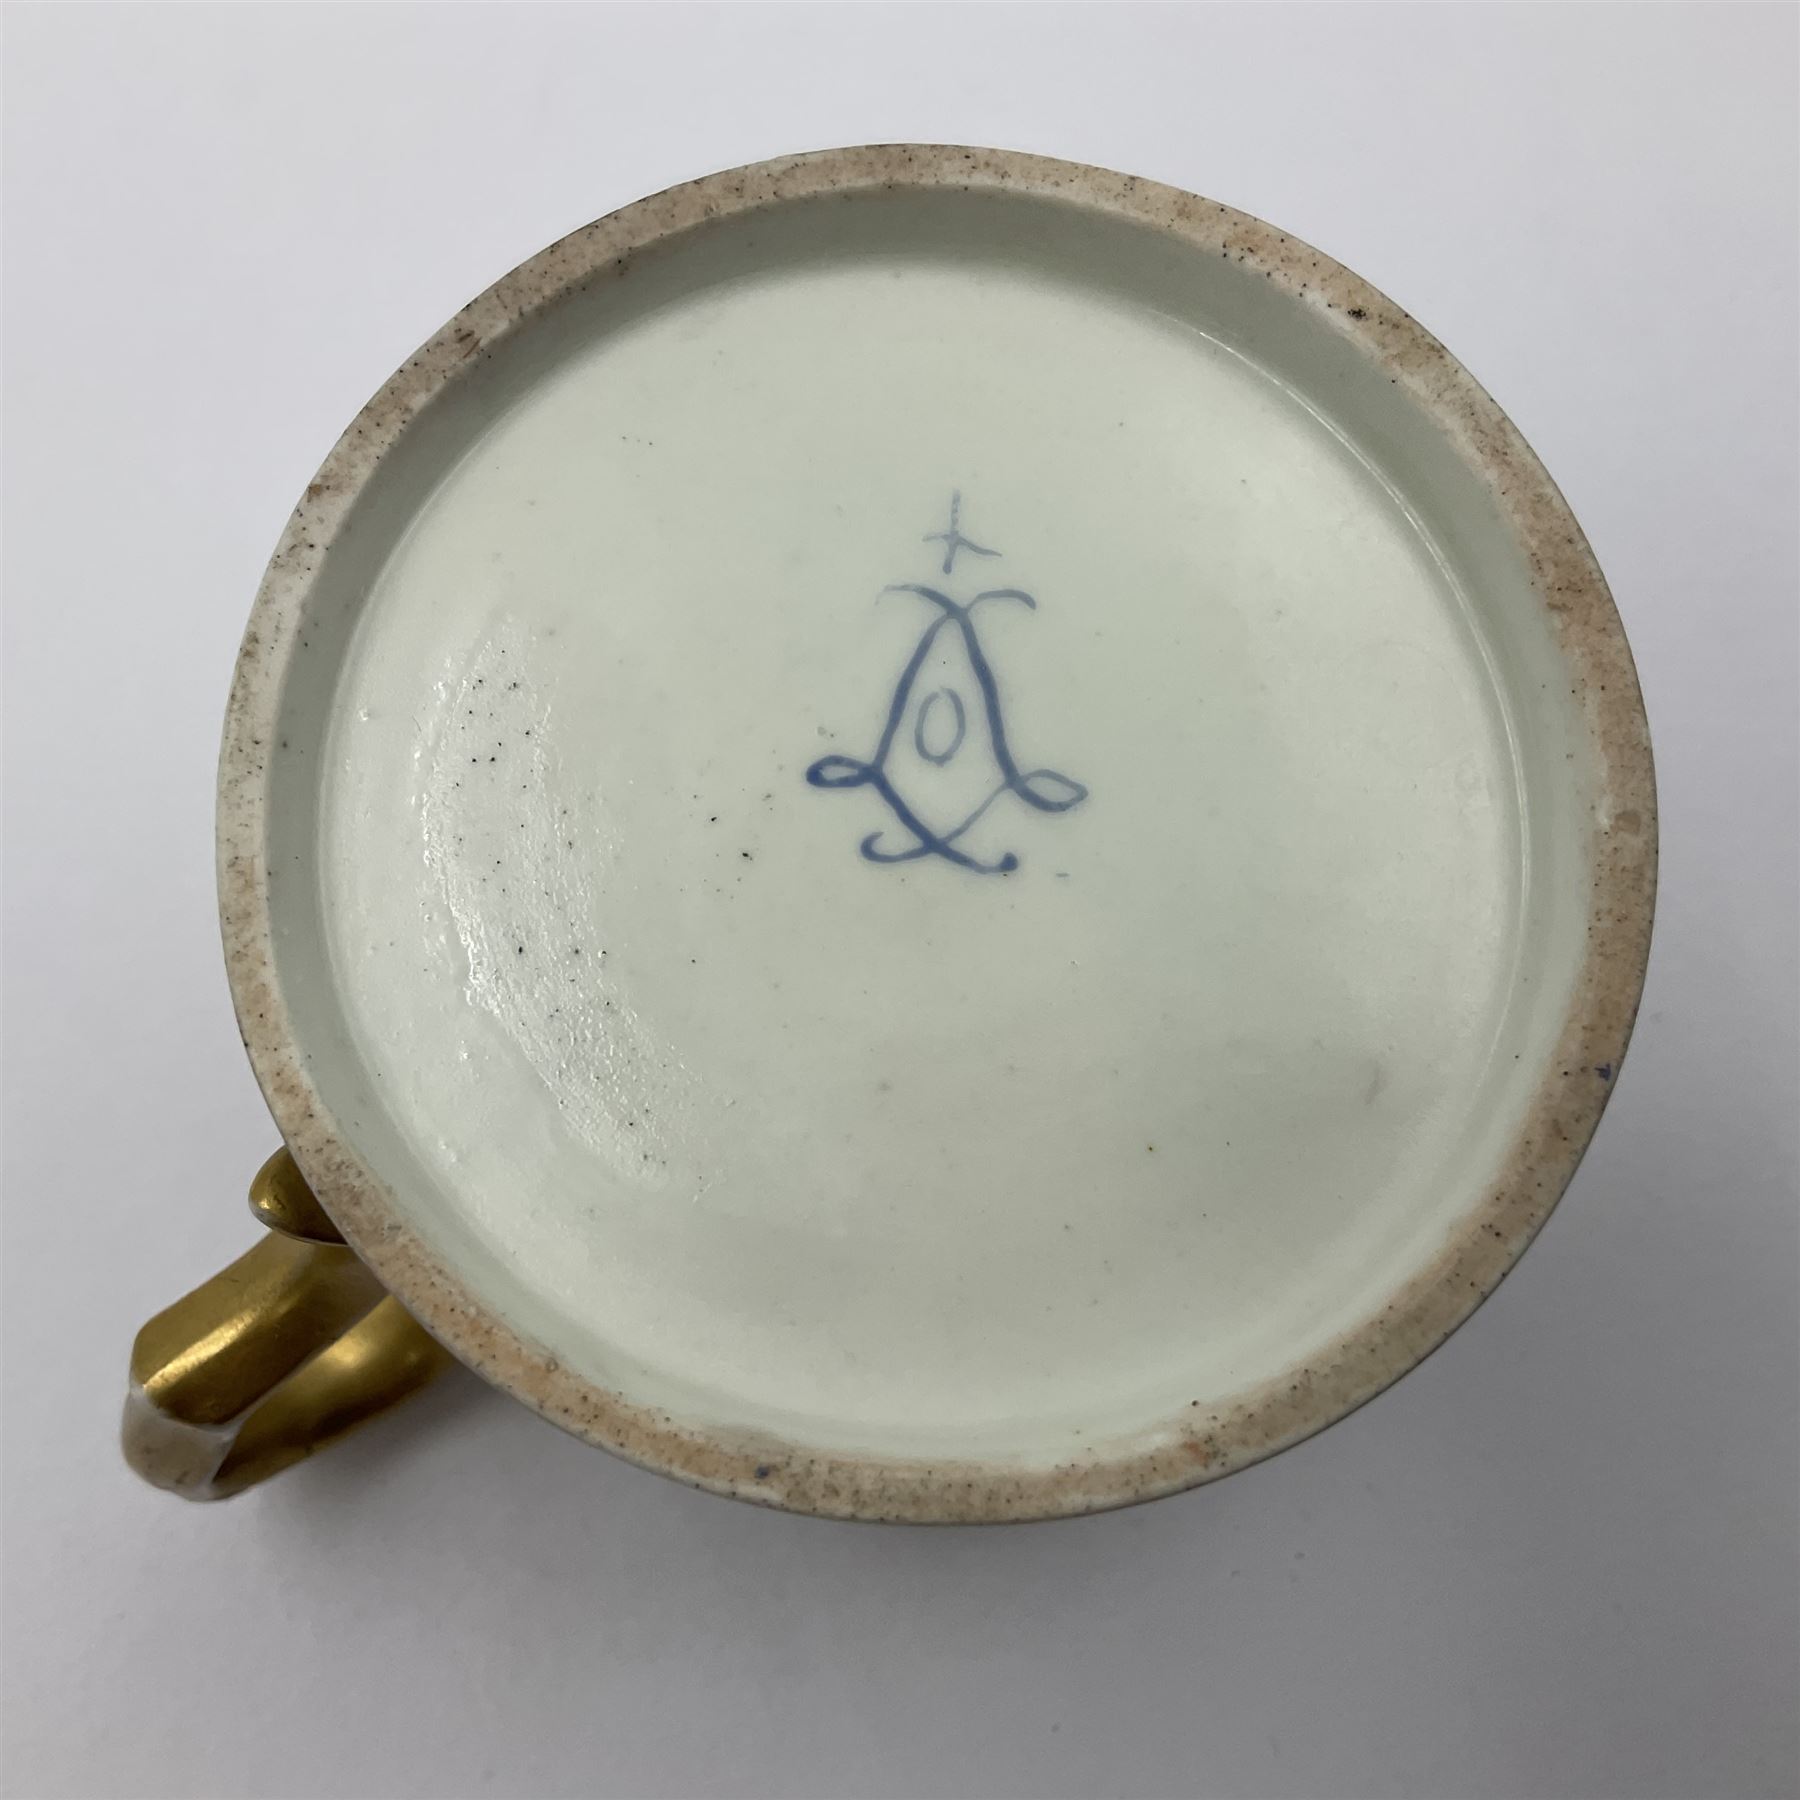 Sevres soft paste porcelain coffee can and saucer with date code for 1767 - Image 16 of 16